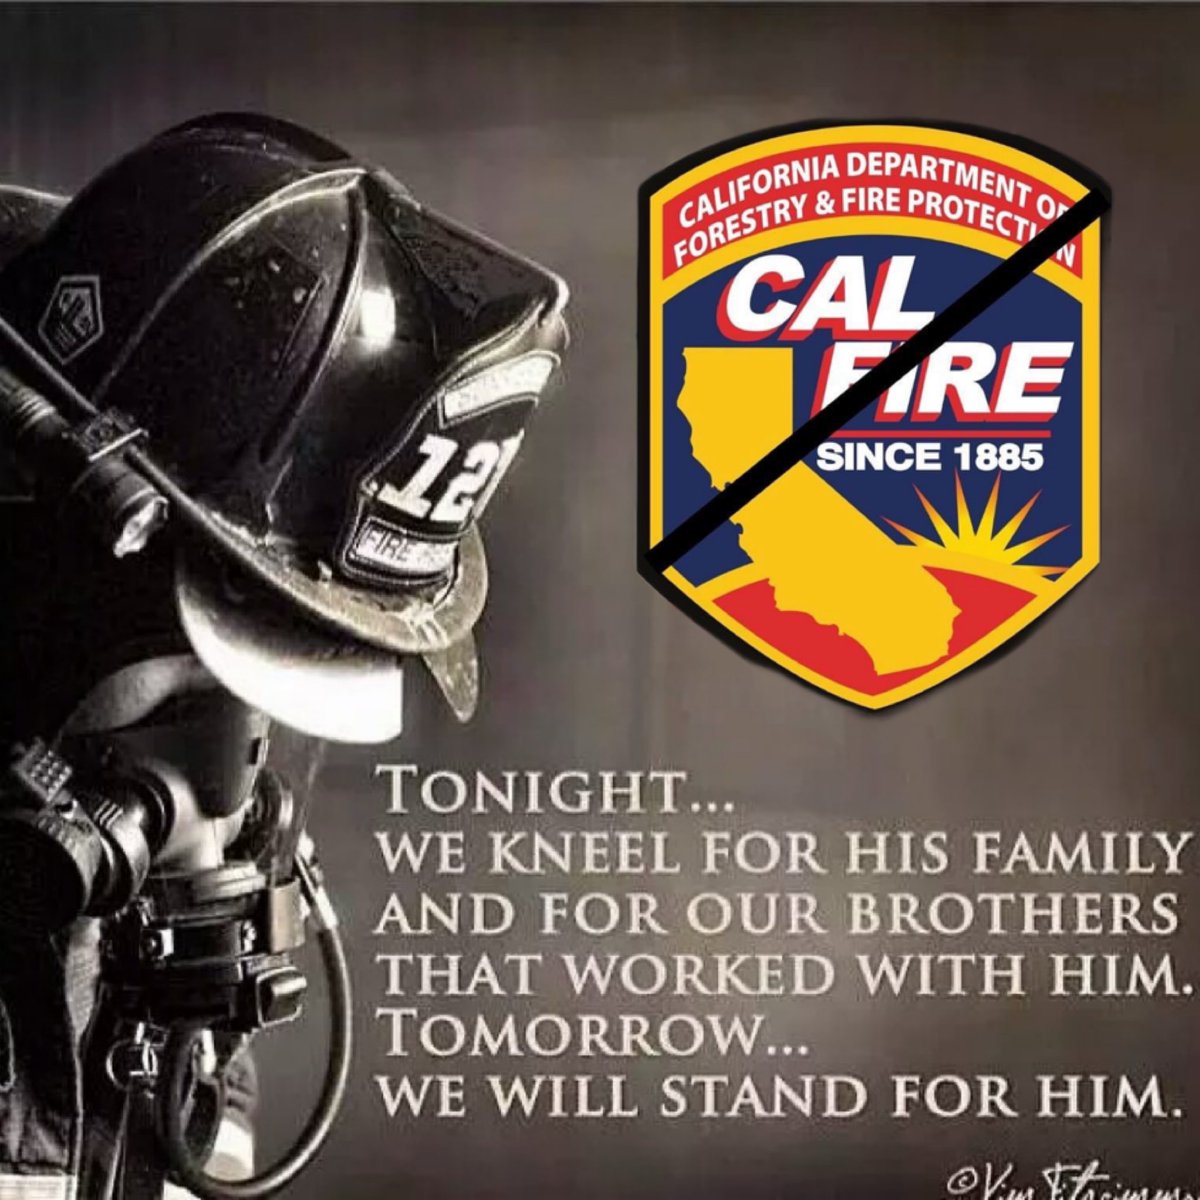 Our hearts are with @calfire and the civilian pilot's family, who tragically perished while bravely battling the #broadwayfire in Cabazon. As Byron Pulsifer said, 'The circumstances of each call are unknown, but the commitment of firefighters is unwavering.' #lodd #lastalarm